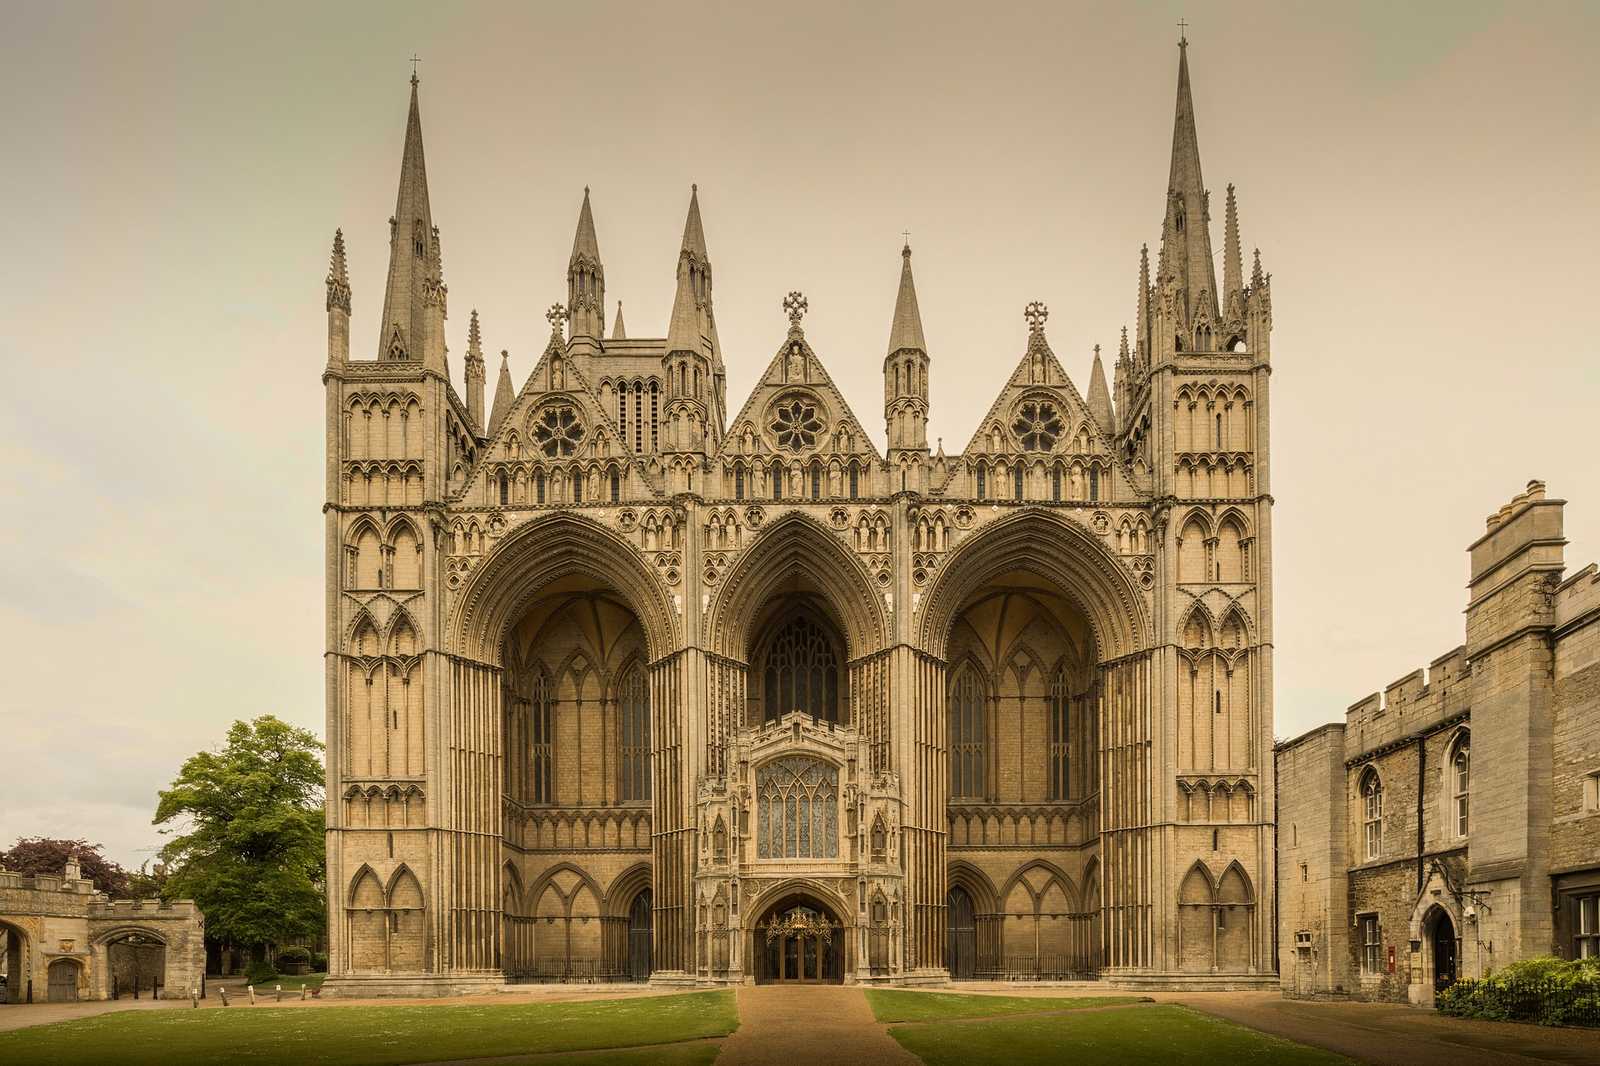 michaelDBeckwith-peterborough-cathedral-3516904-1600x